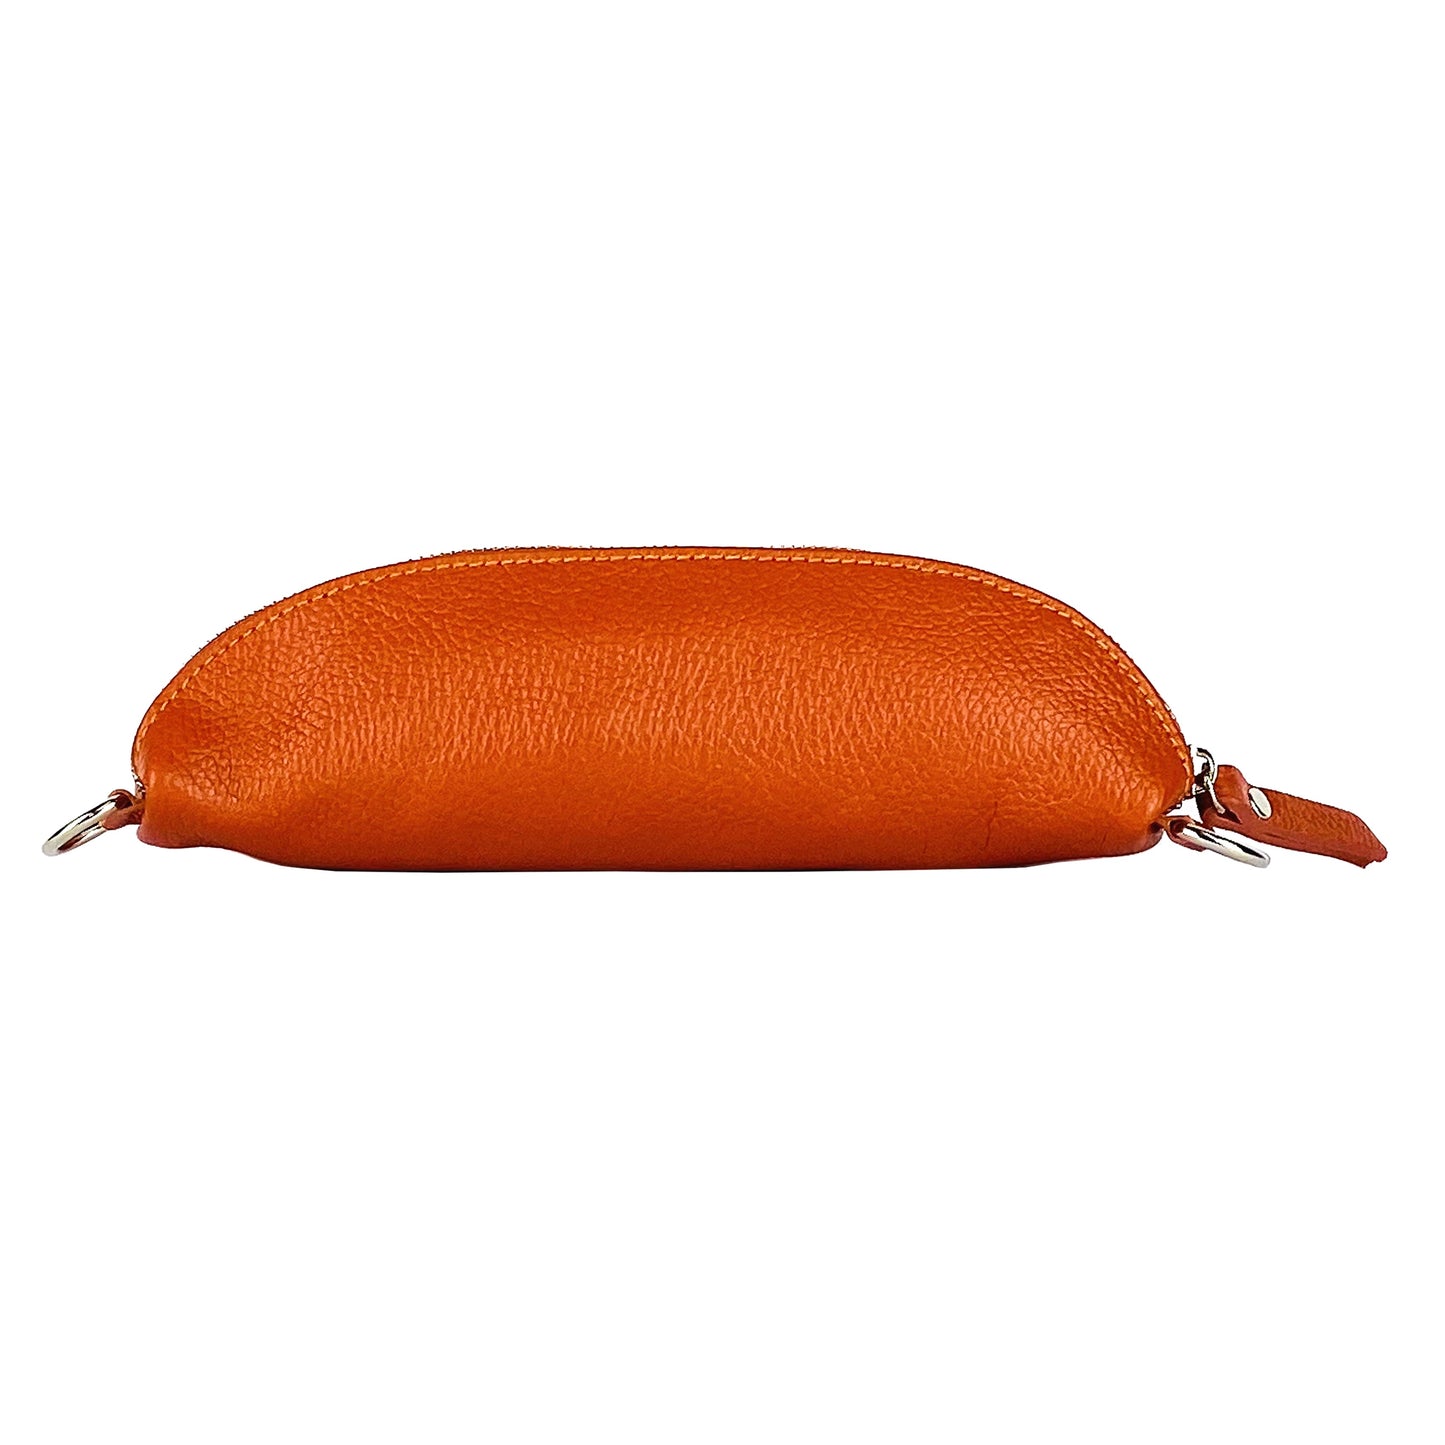 RB1015L | Waist bag with removable shoulder strap in Genuine Leather Made in Italy. Attachments with shiny nickel metal snap hooks - Orange color - Dimensions: 24 x 14 x 7-3